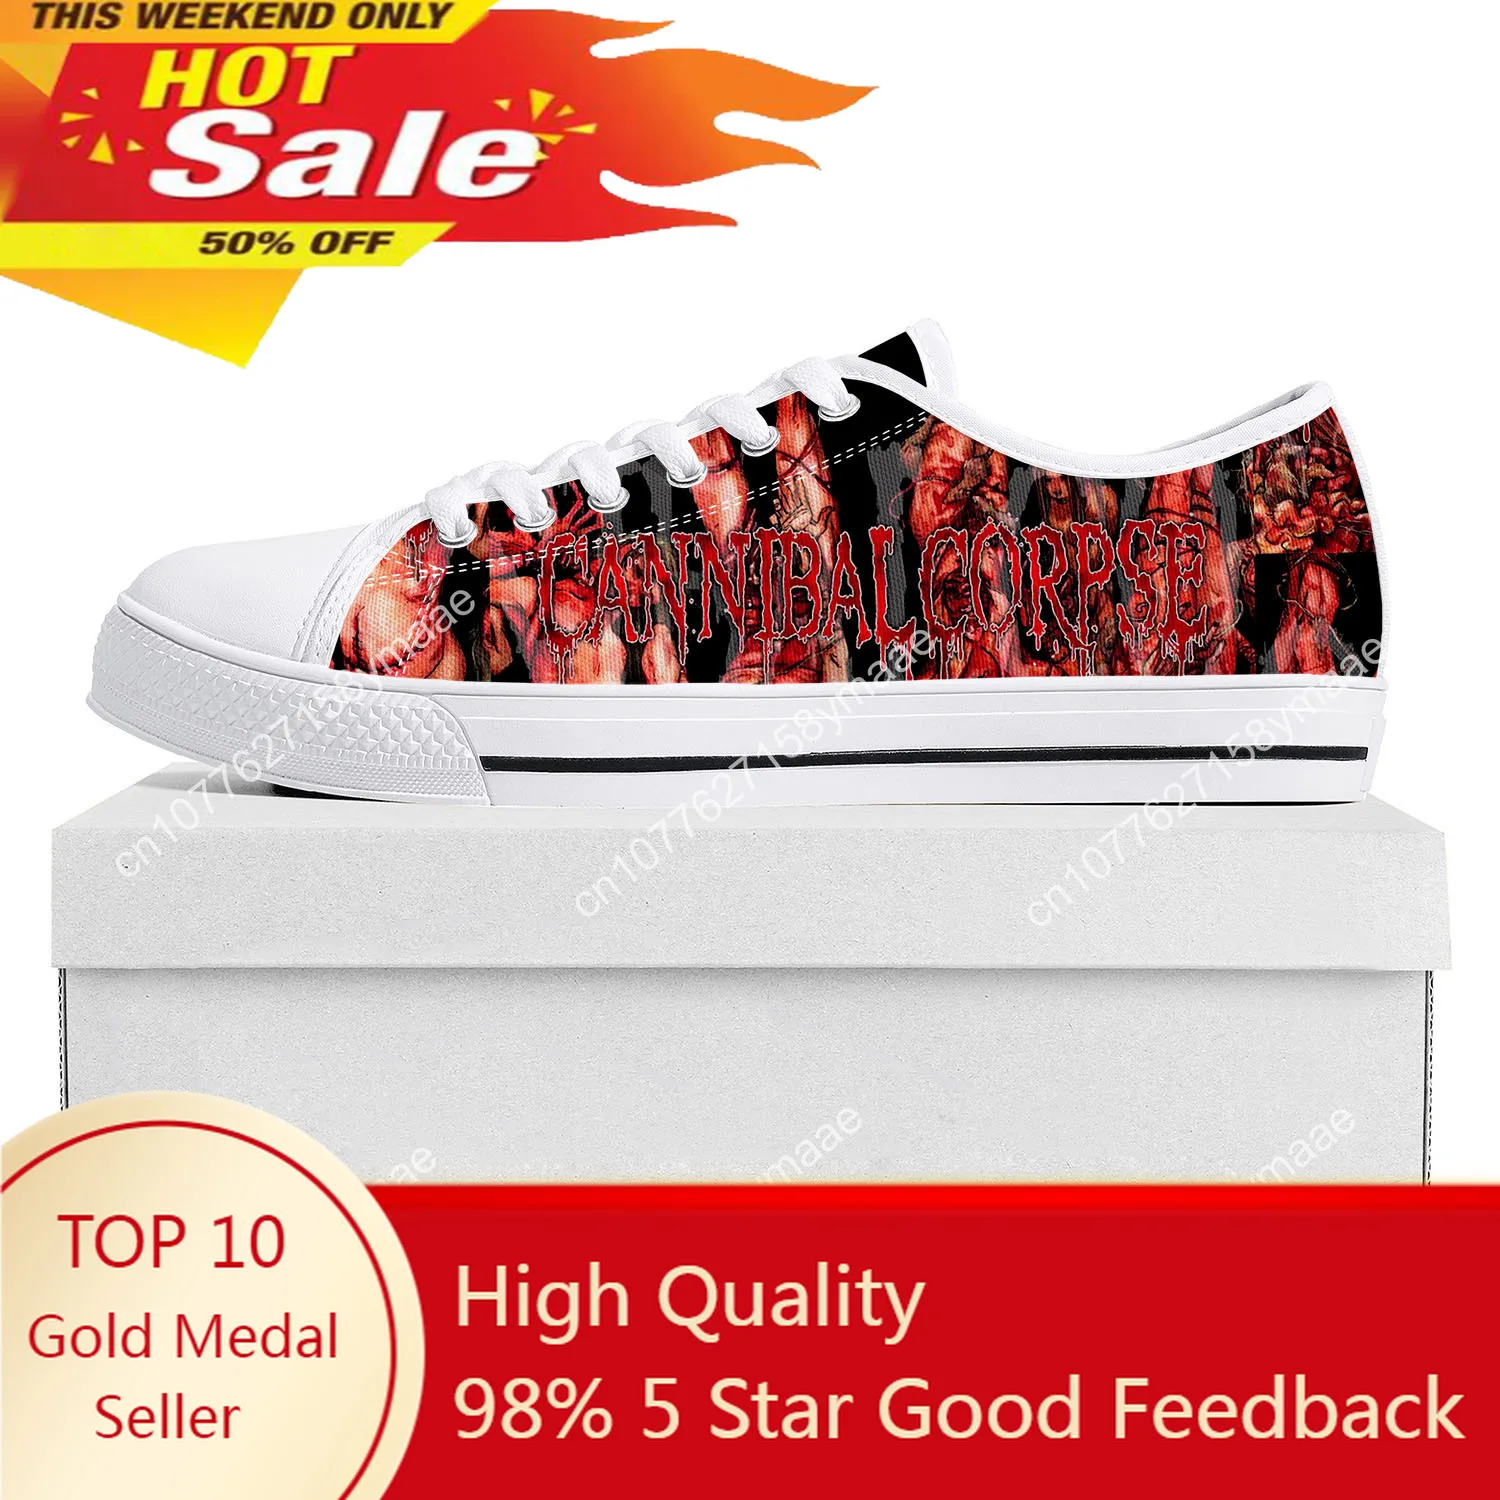 

Cannibal Corpse Rock Band Low Top Sneakers Mens Womens Teenager Canvas High Quality Death Metal Sneaker Casual Customize Shoe